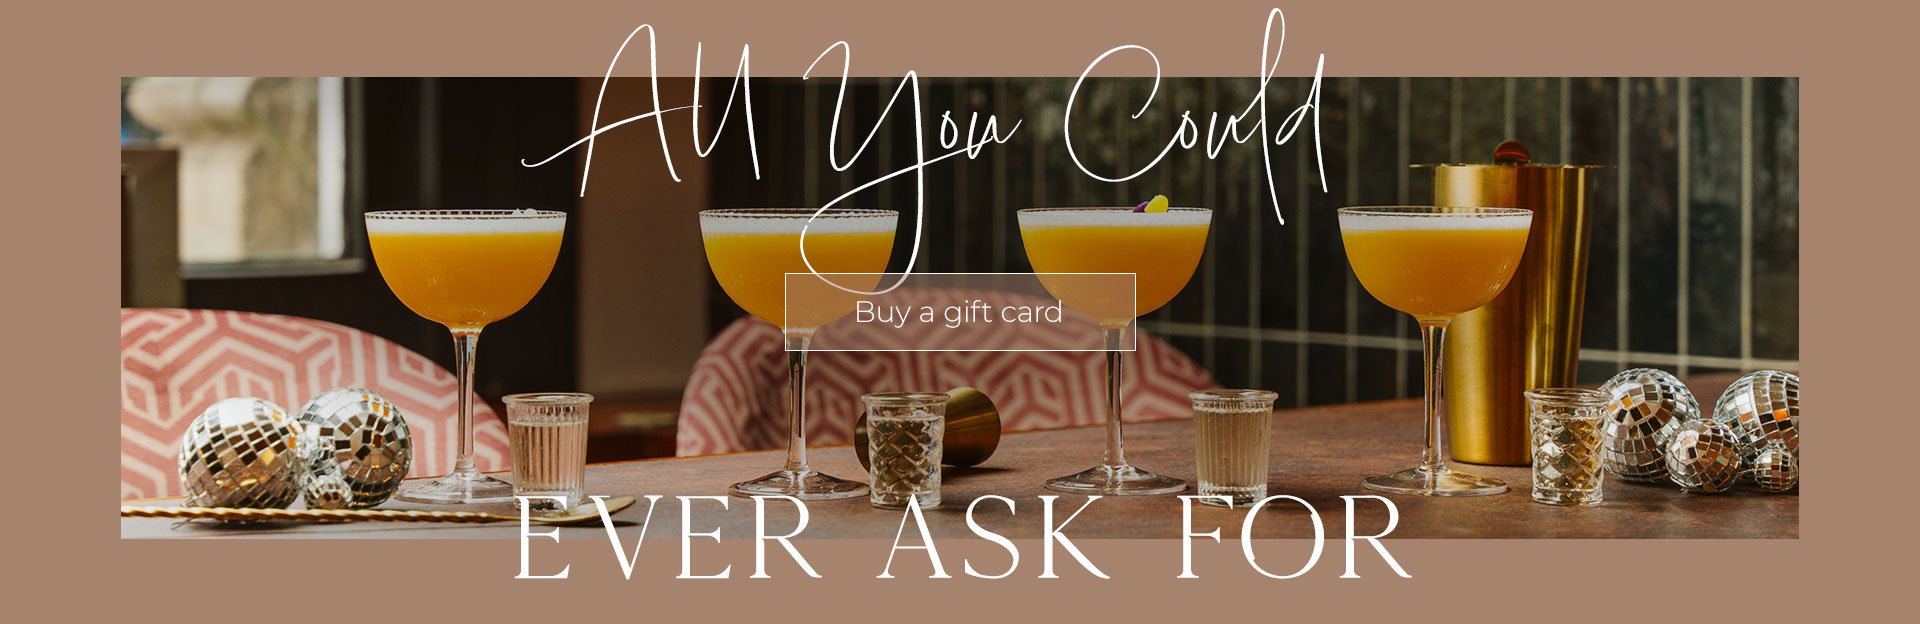 All Bar One Gift Cards at All Bar One Charing Cross